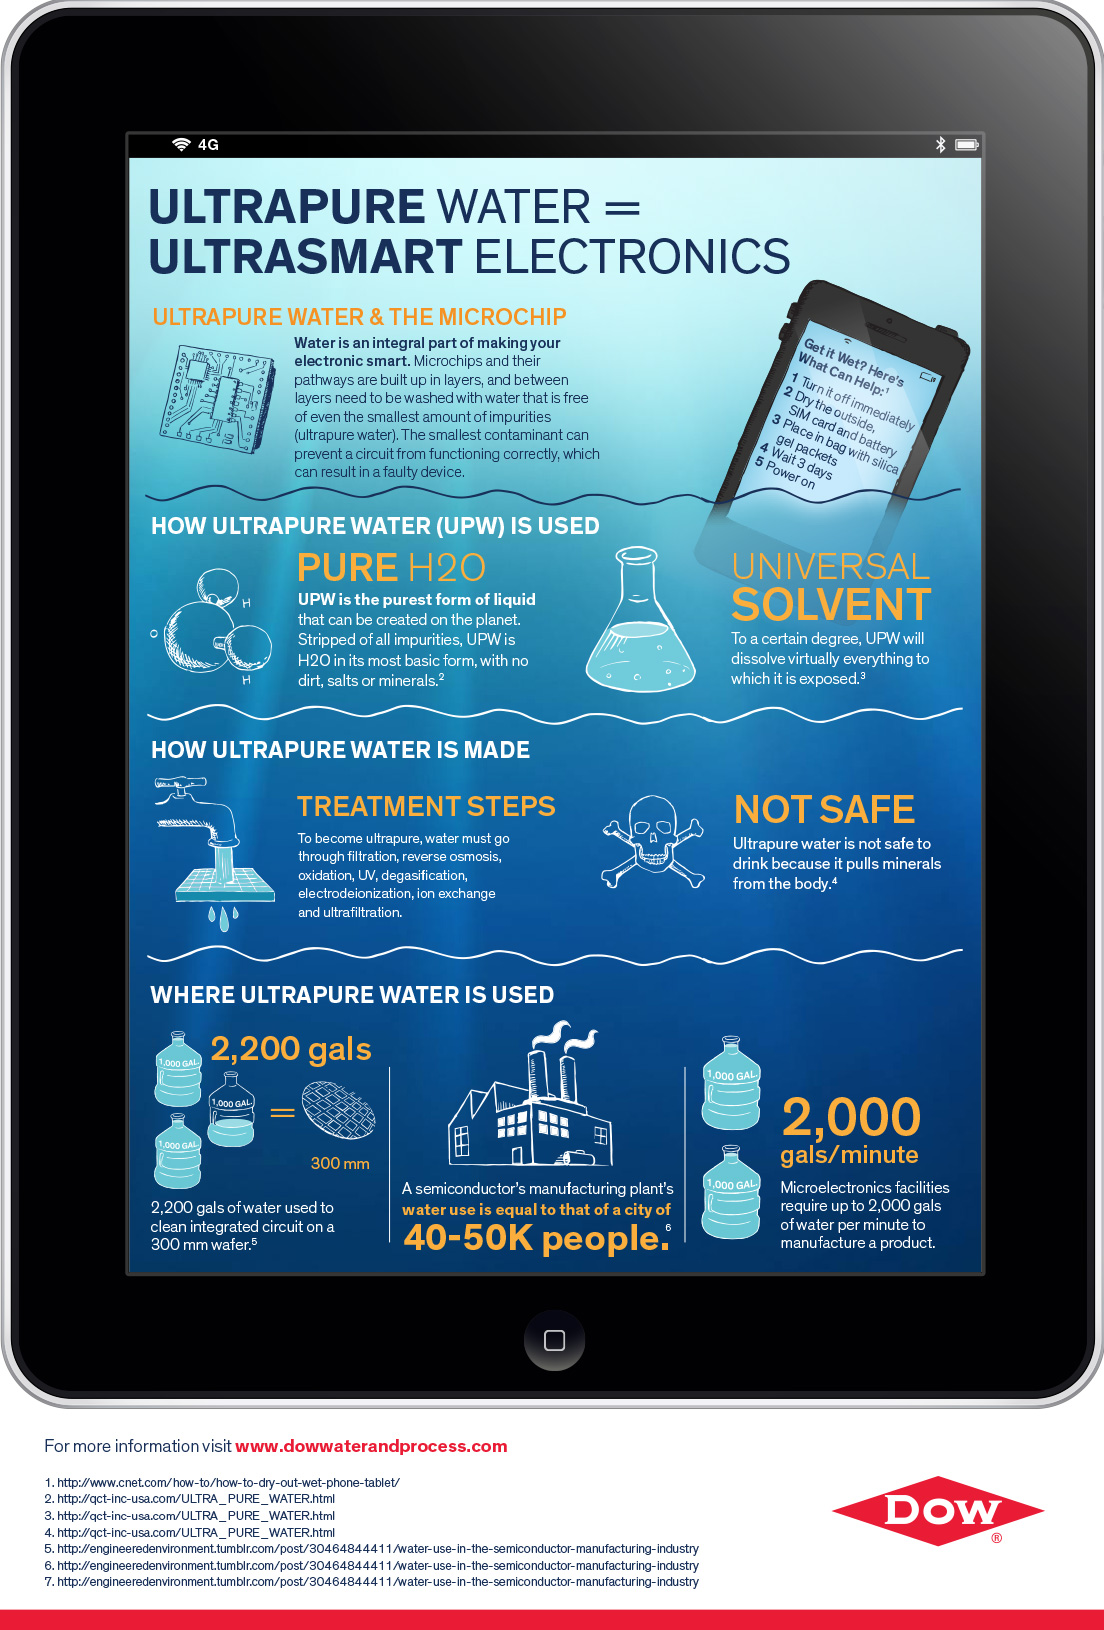 Dow Water &amp; Process Solutions released a new infographic on ultrapure water (UPW) and how it can impact electronics.